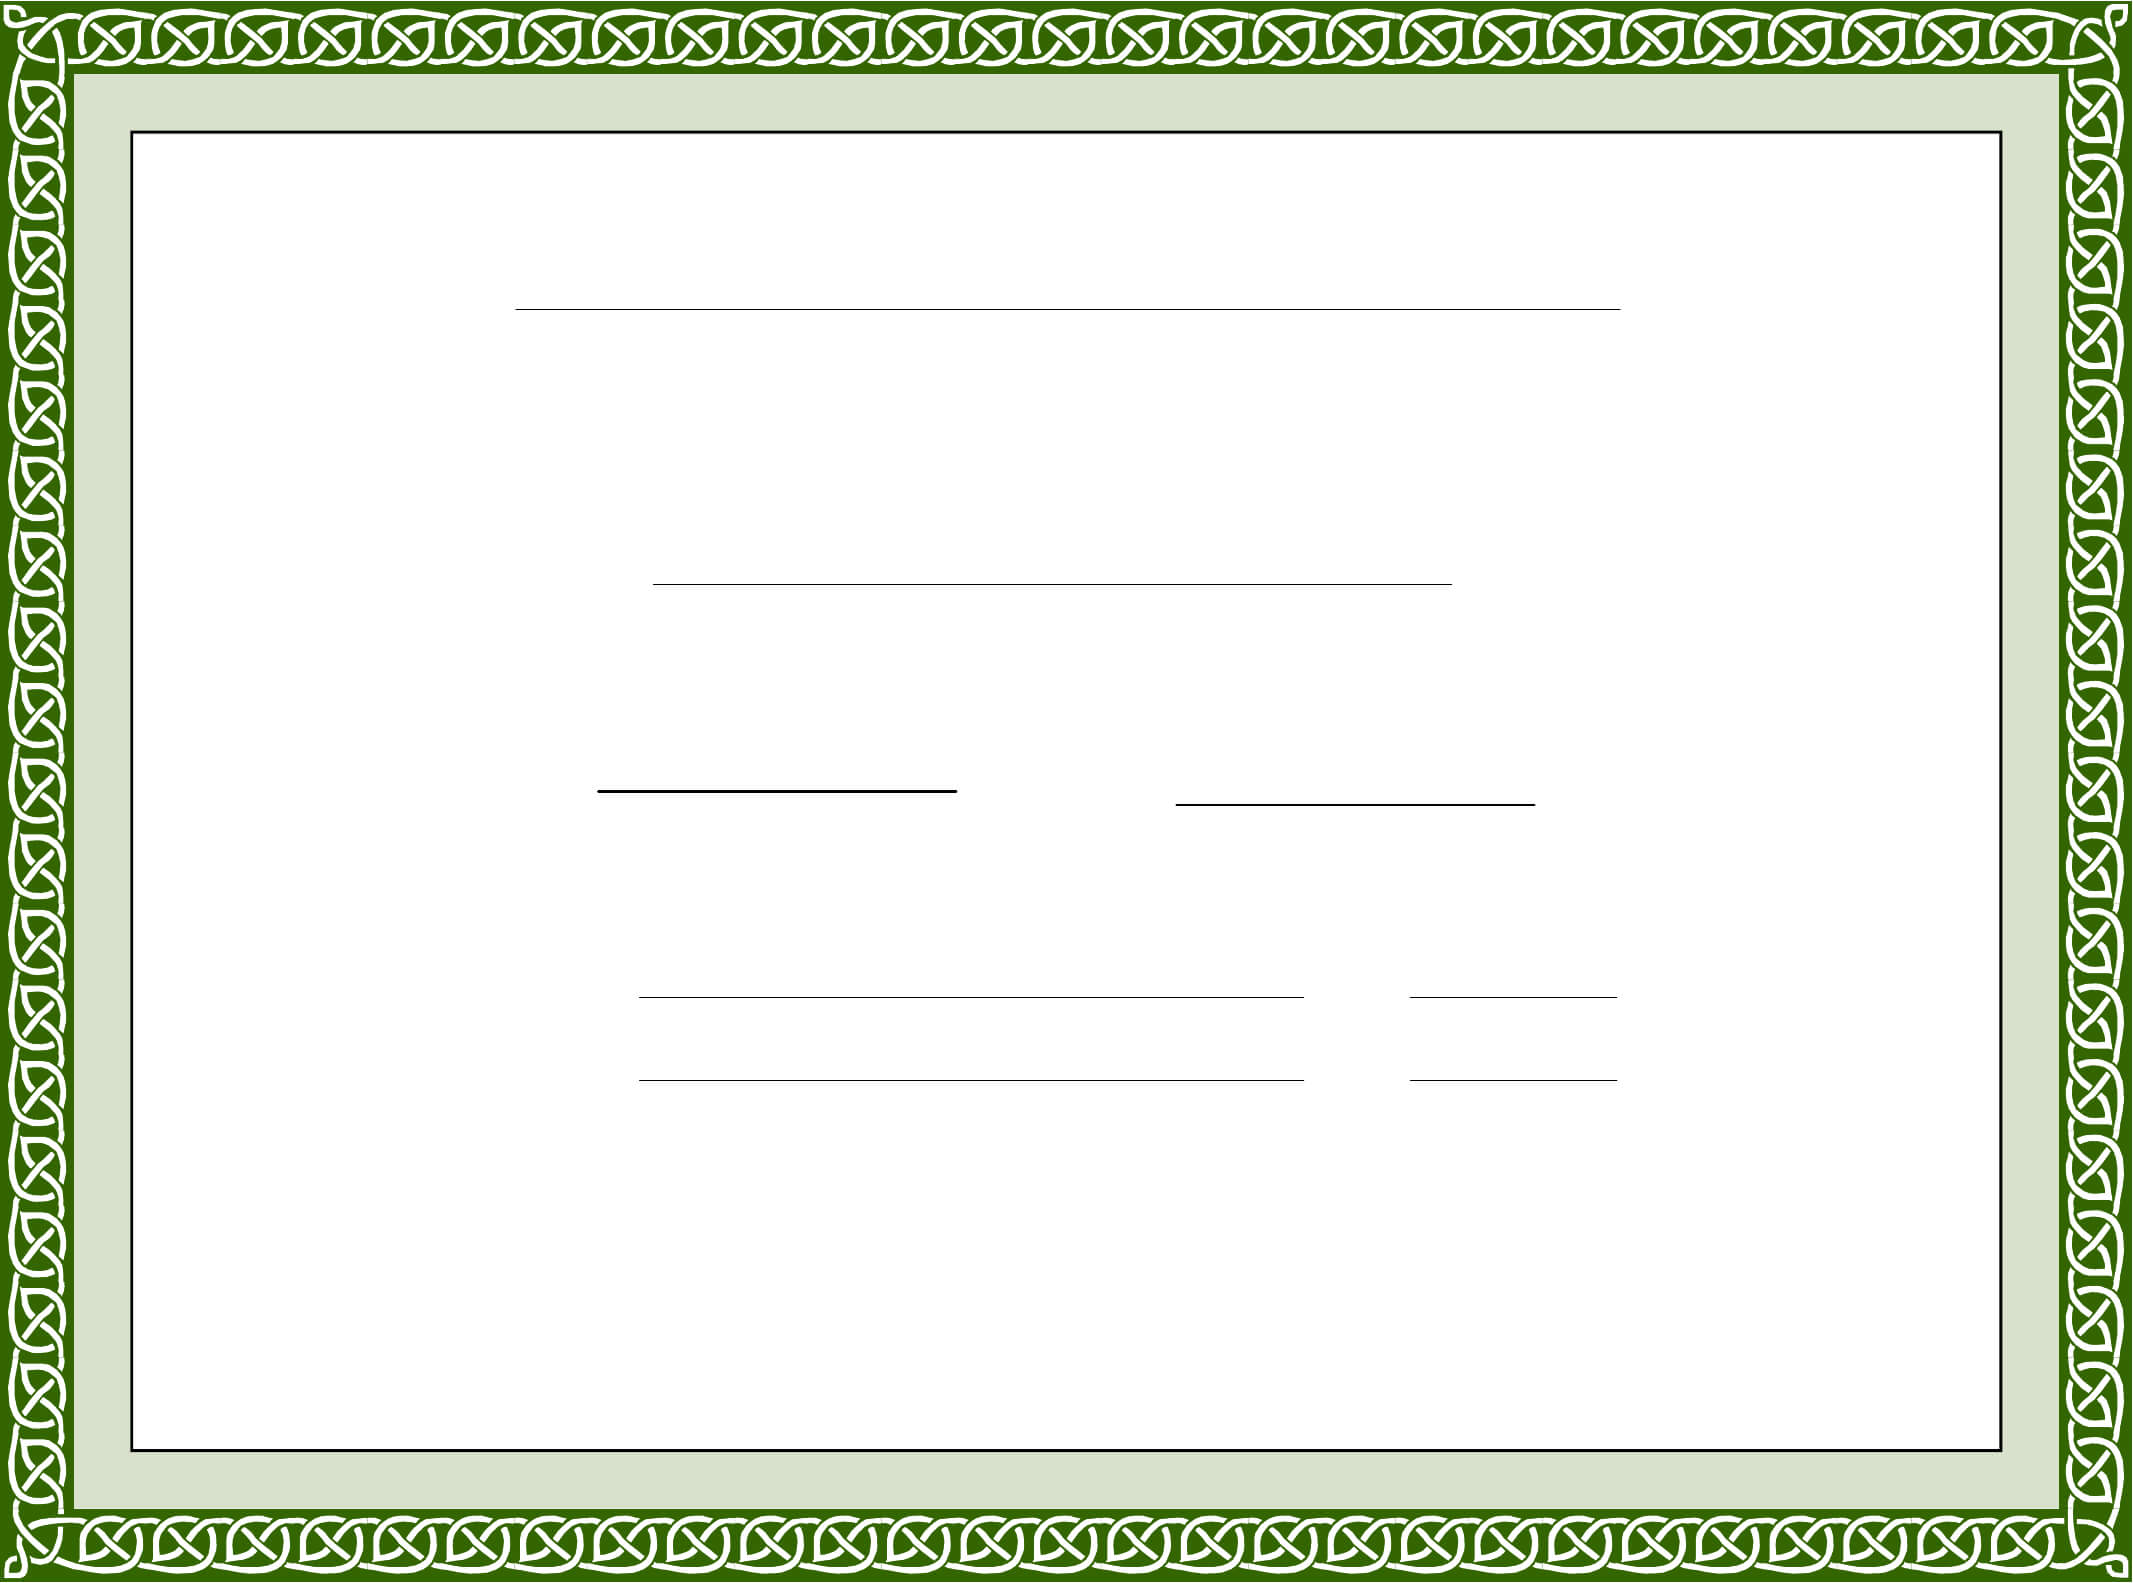 Sample Training Completion Certificate Template Free Download For Free Training Completion Certificate Templates